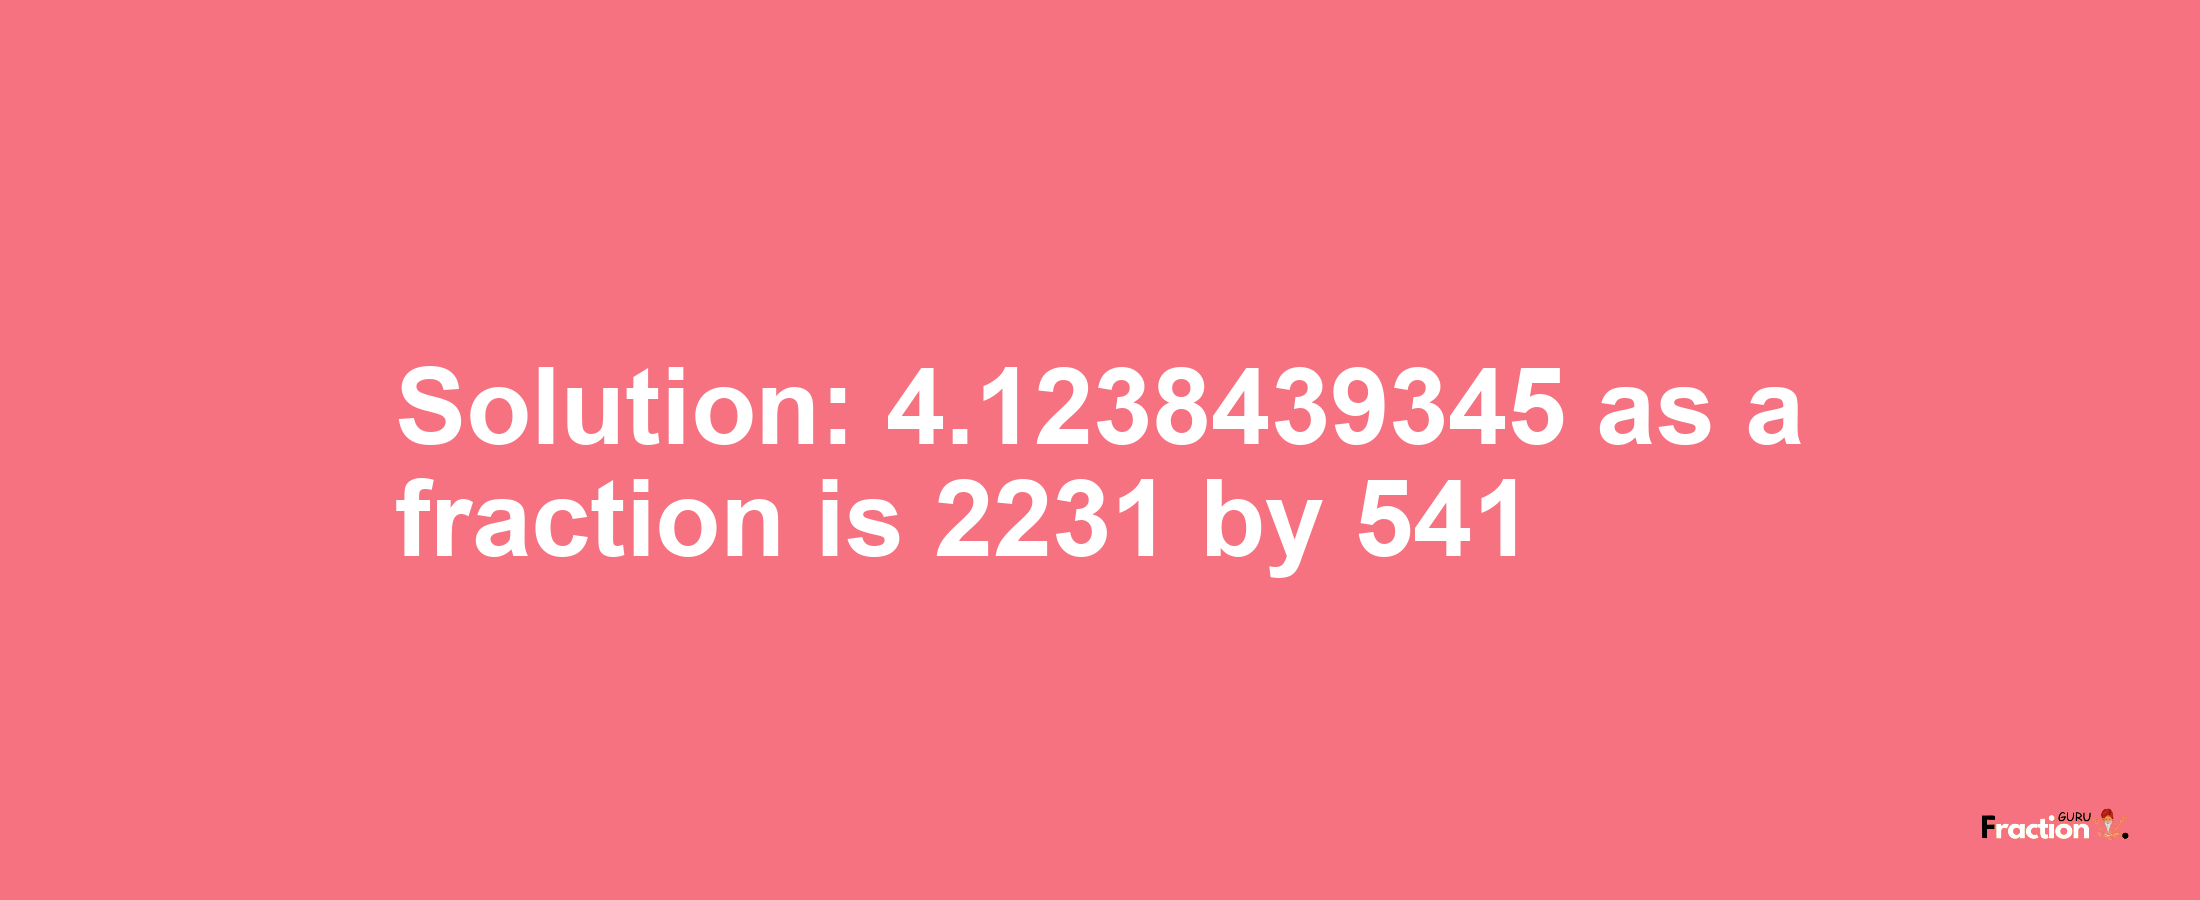 Solution:4.1238439345 as a fraction is 2231/541